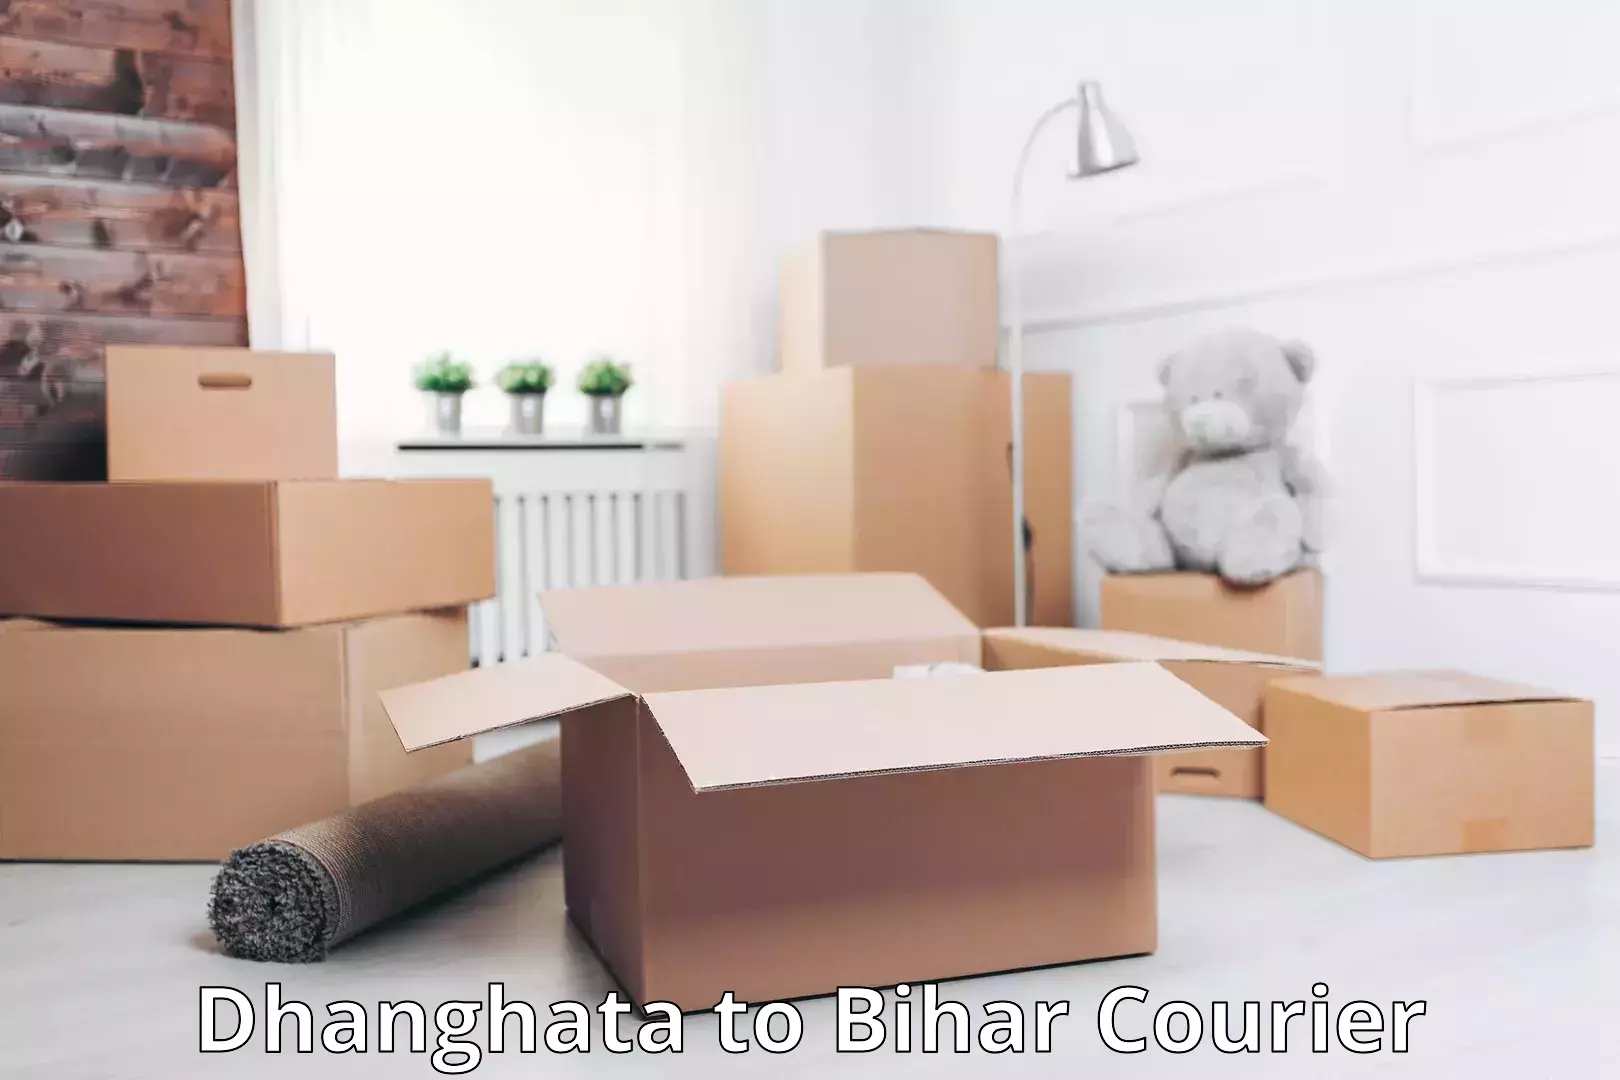 Baggage relocation service Dhanghata to Bihar